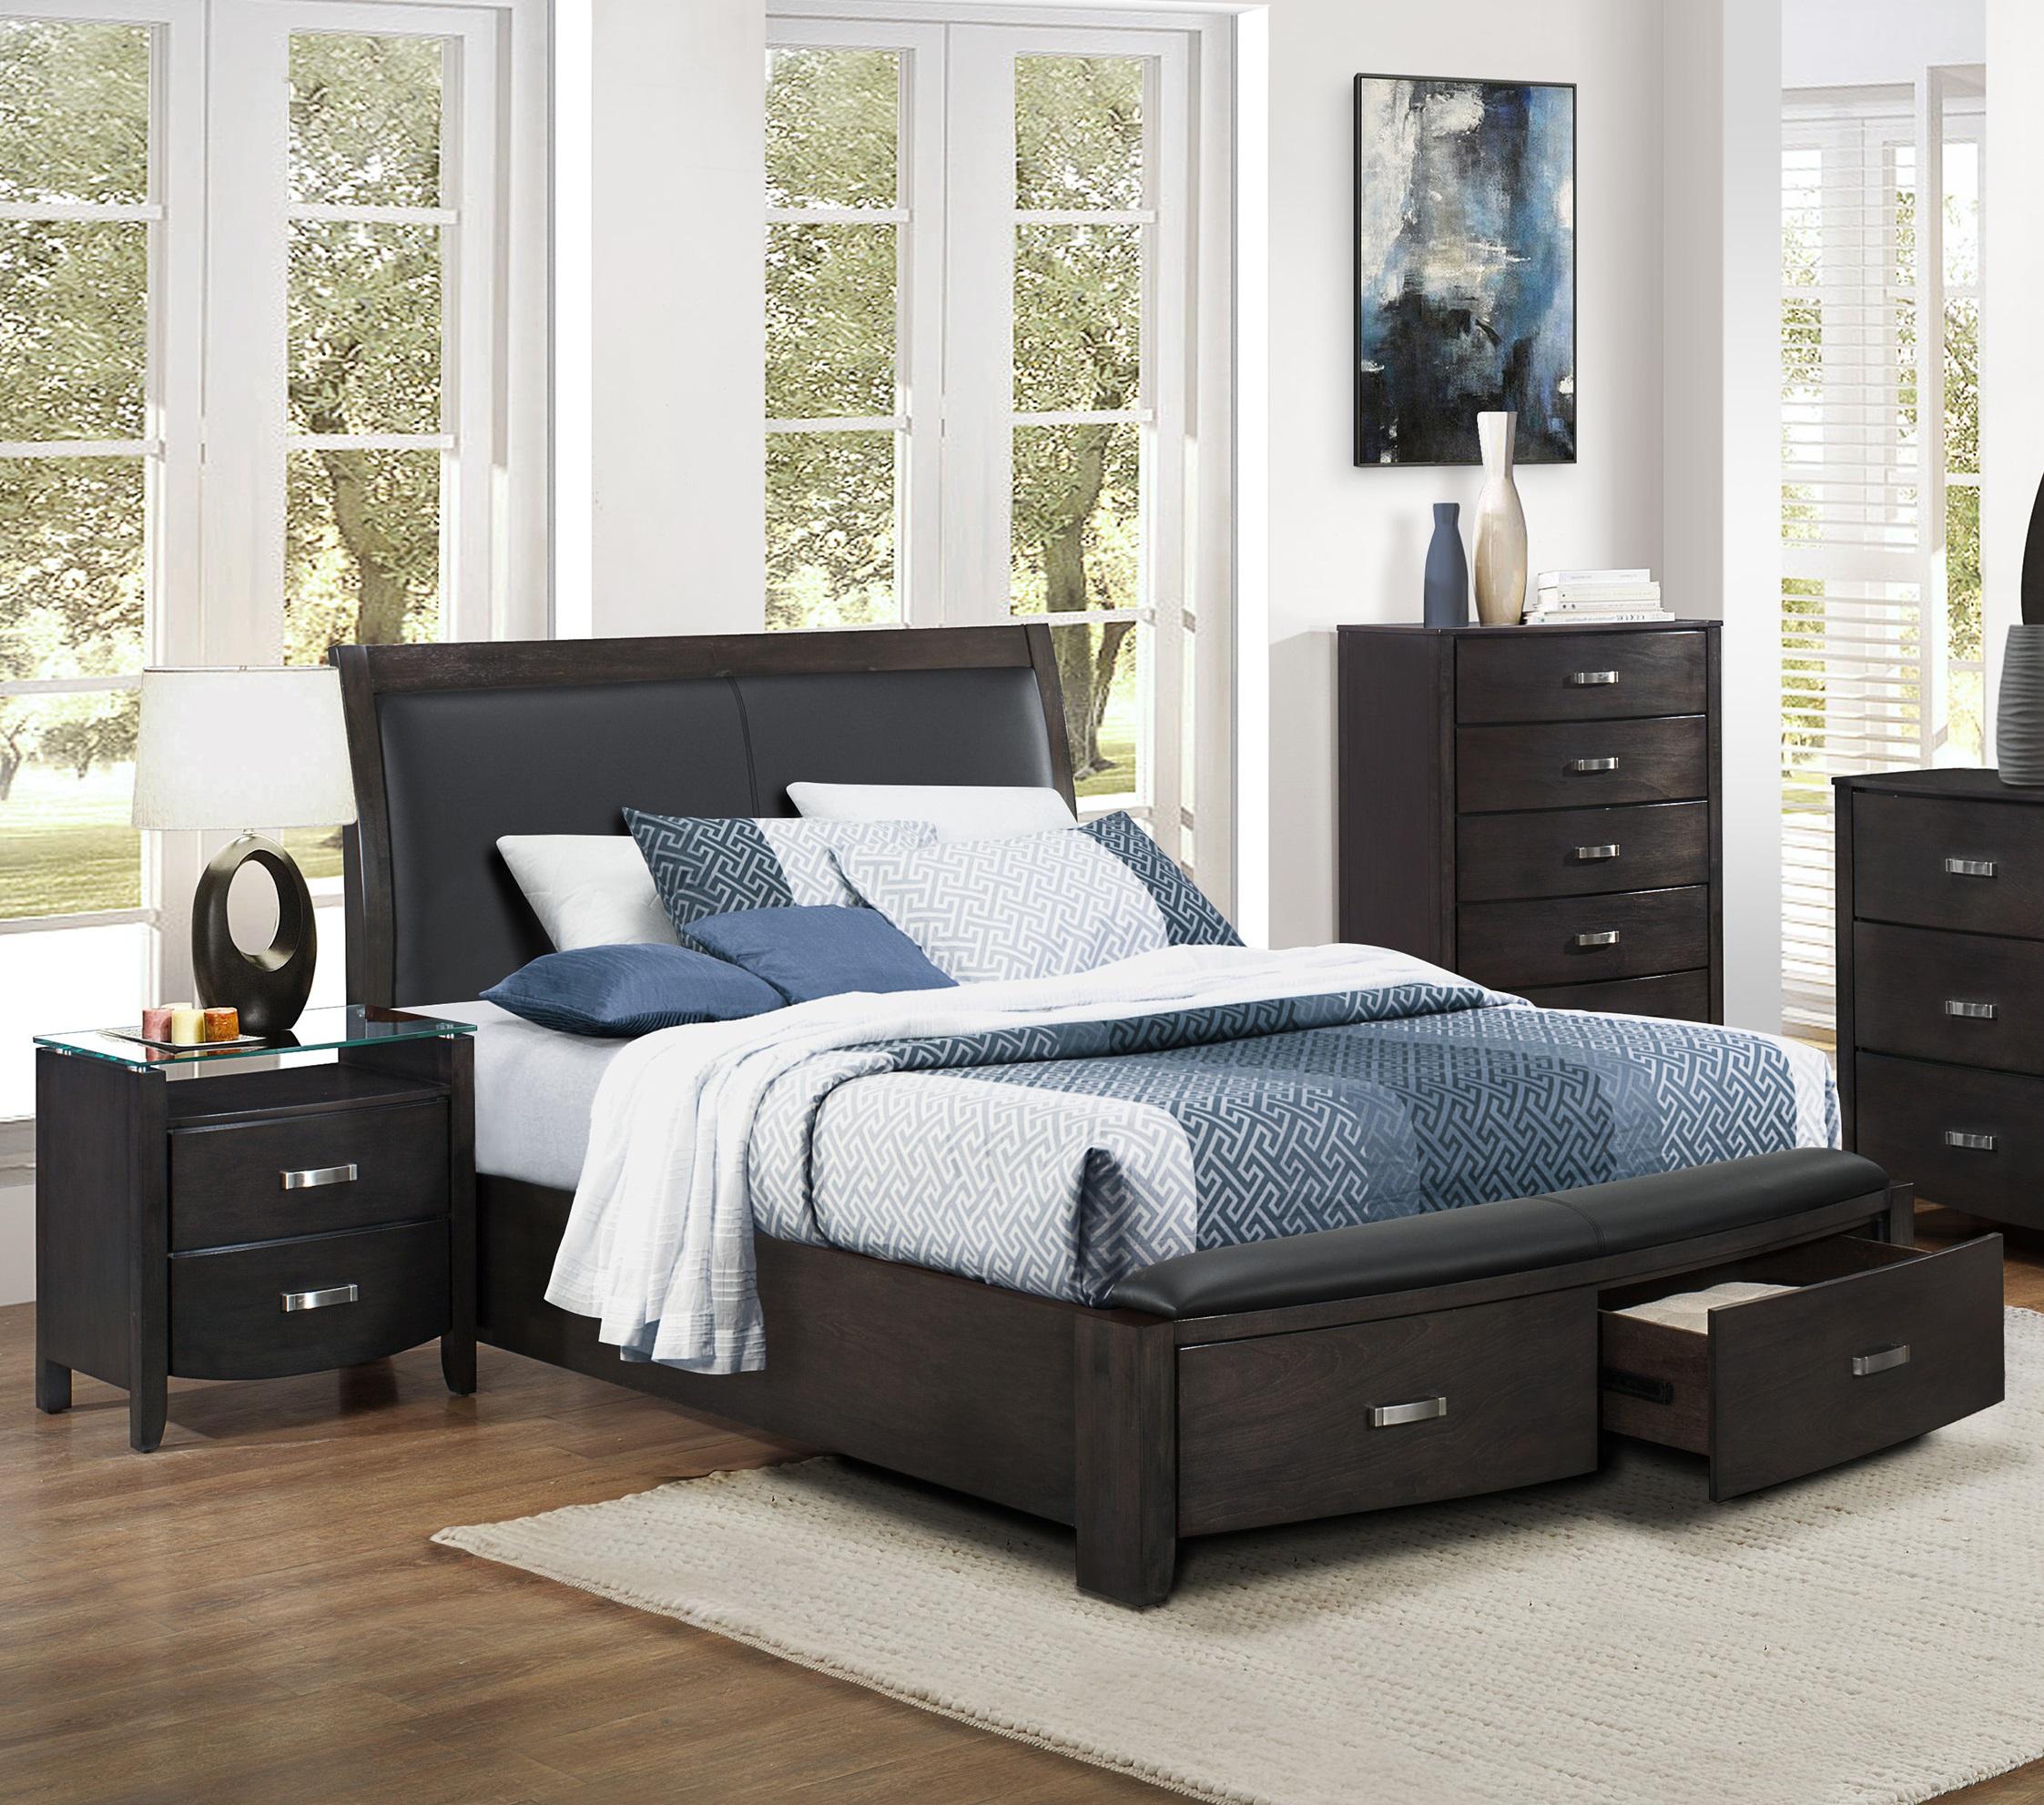 Contemporary Bedroom Set 1737KNGY-1EK-3PC Lyric 1737KNGY-1EK-3PC in Gray Faux Leather